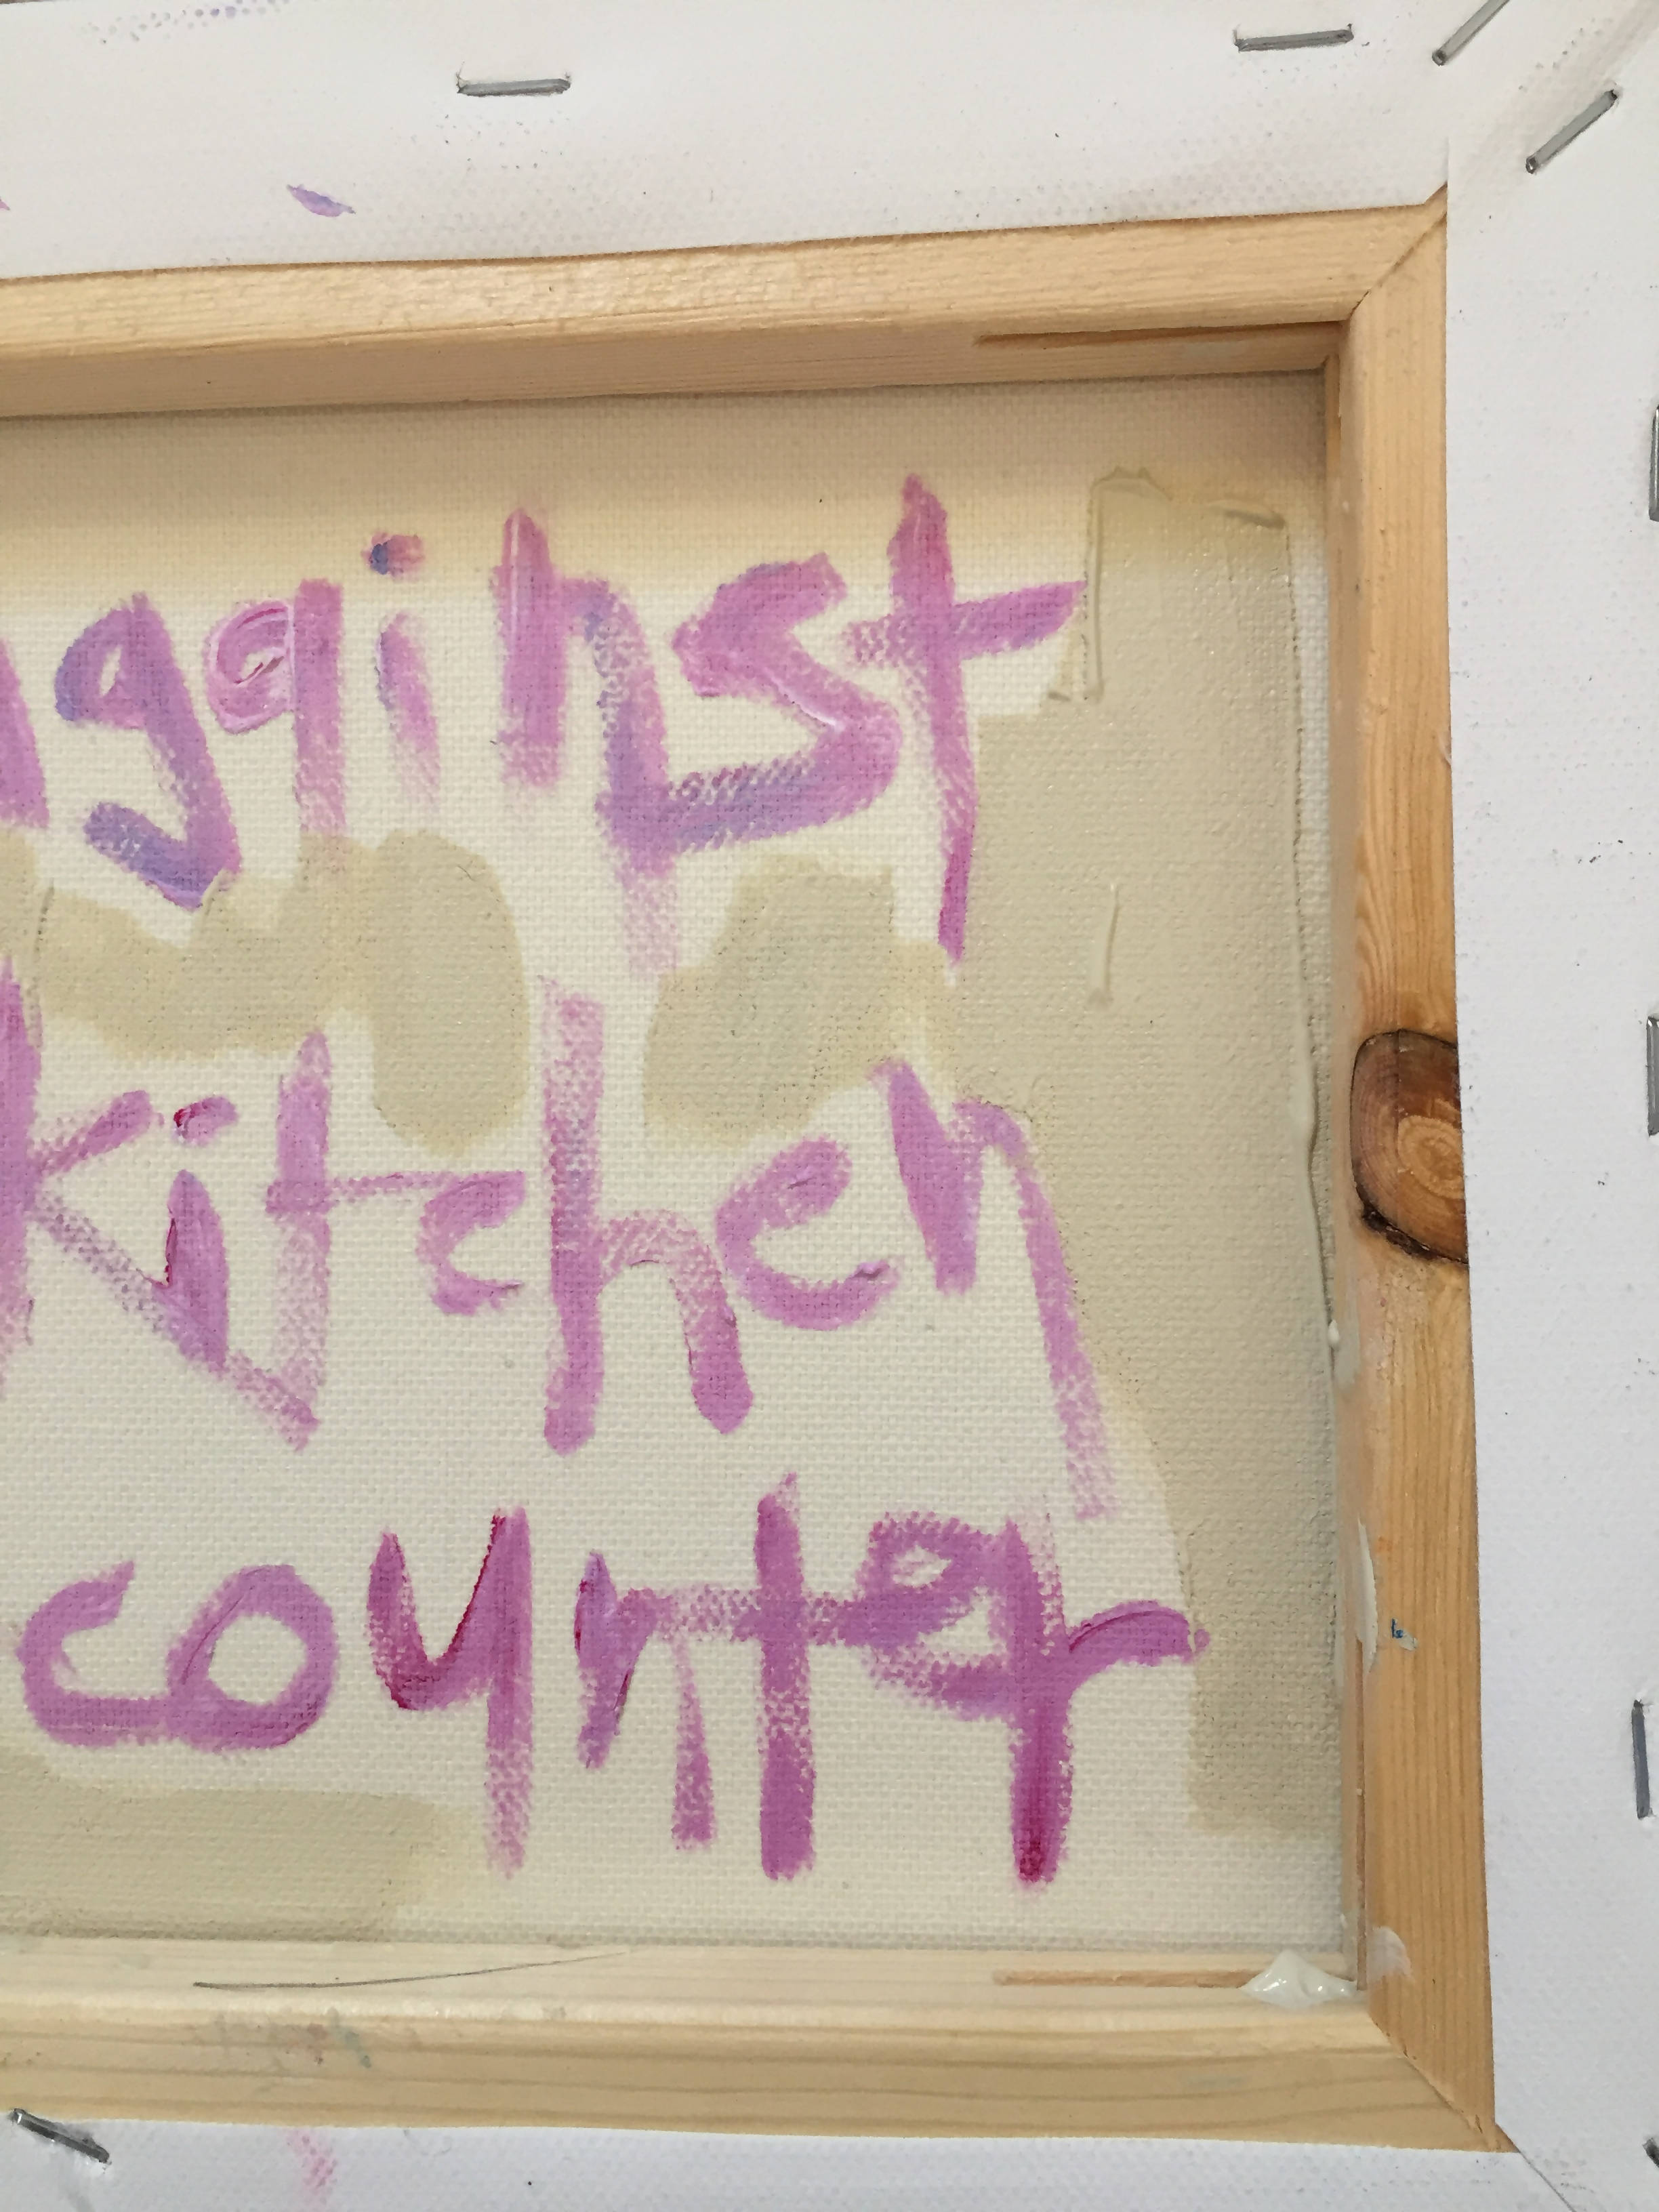 against the kitchen counter